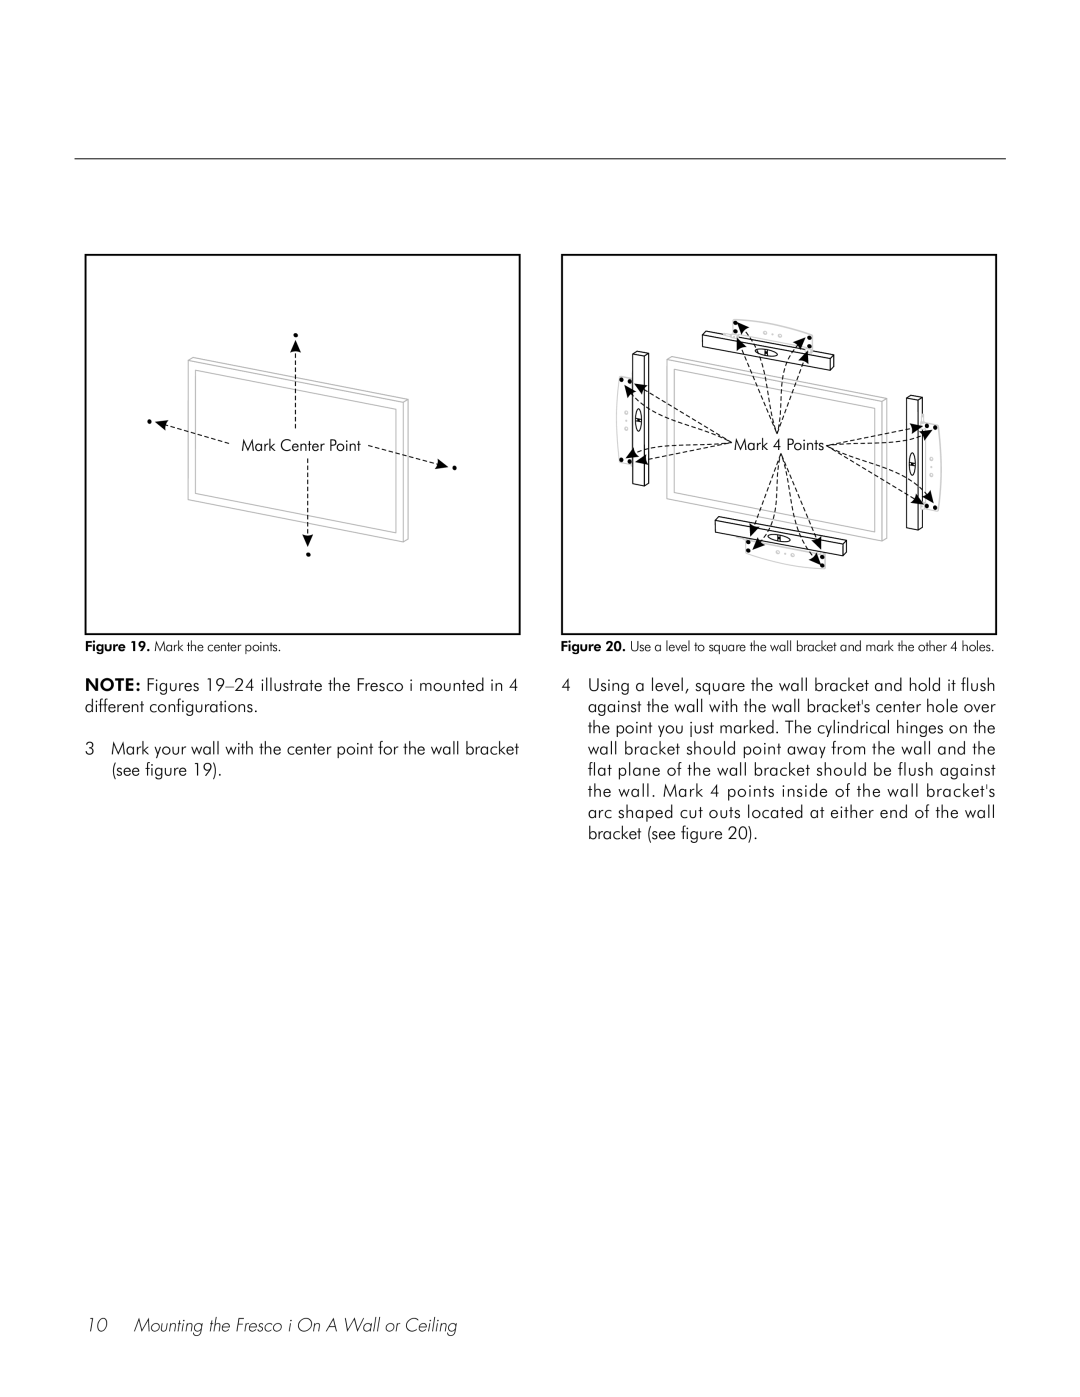 Fresco Speaker user manual Mounting the Fresco i On A Wall or Ceiling, Mark the center points 